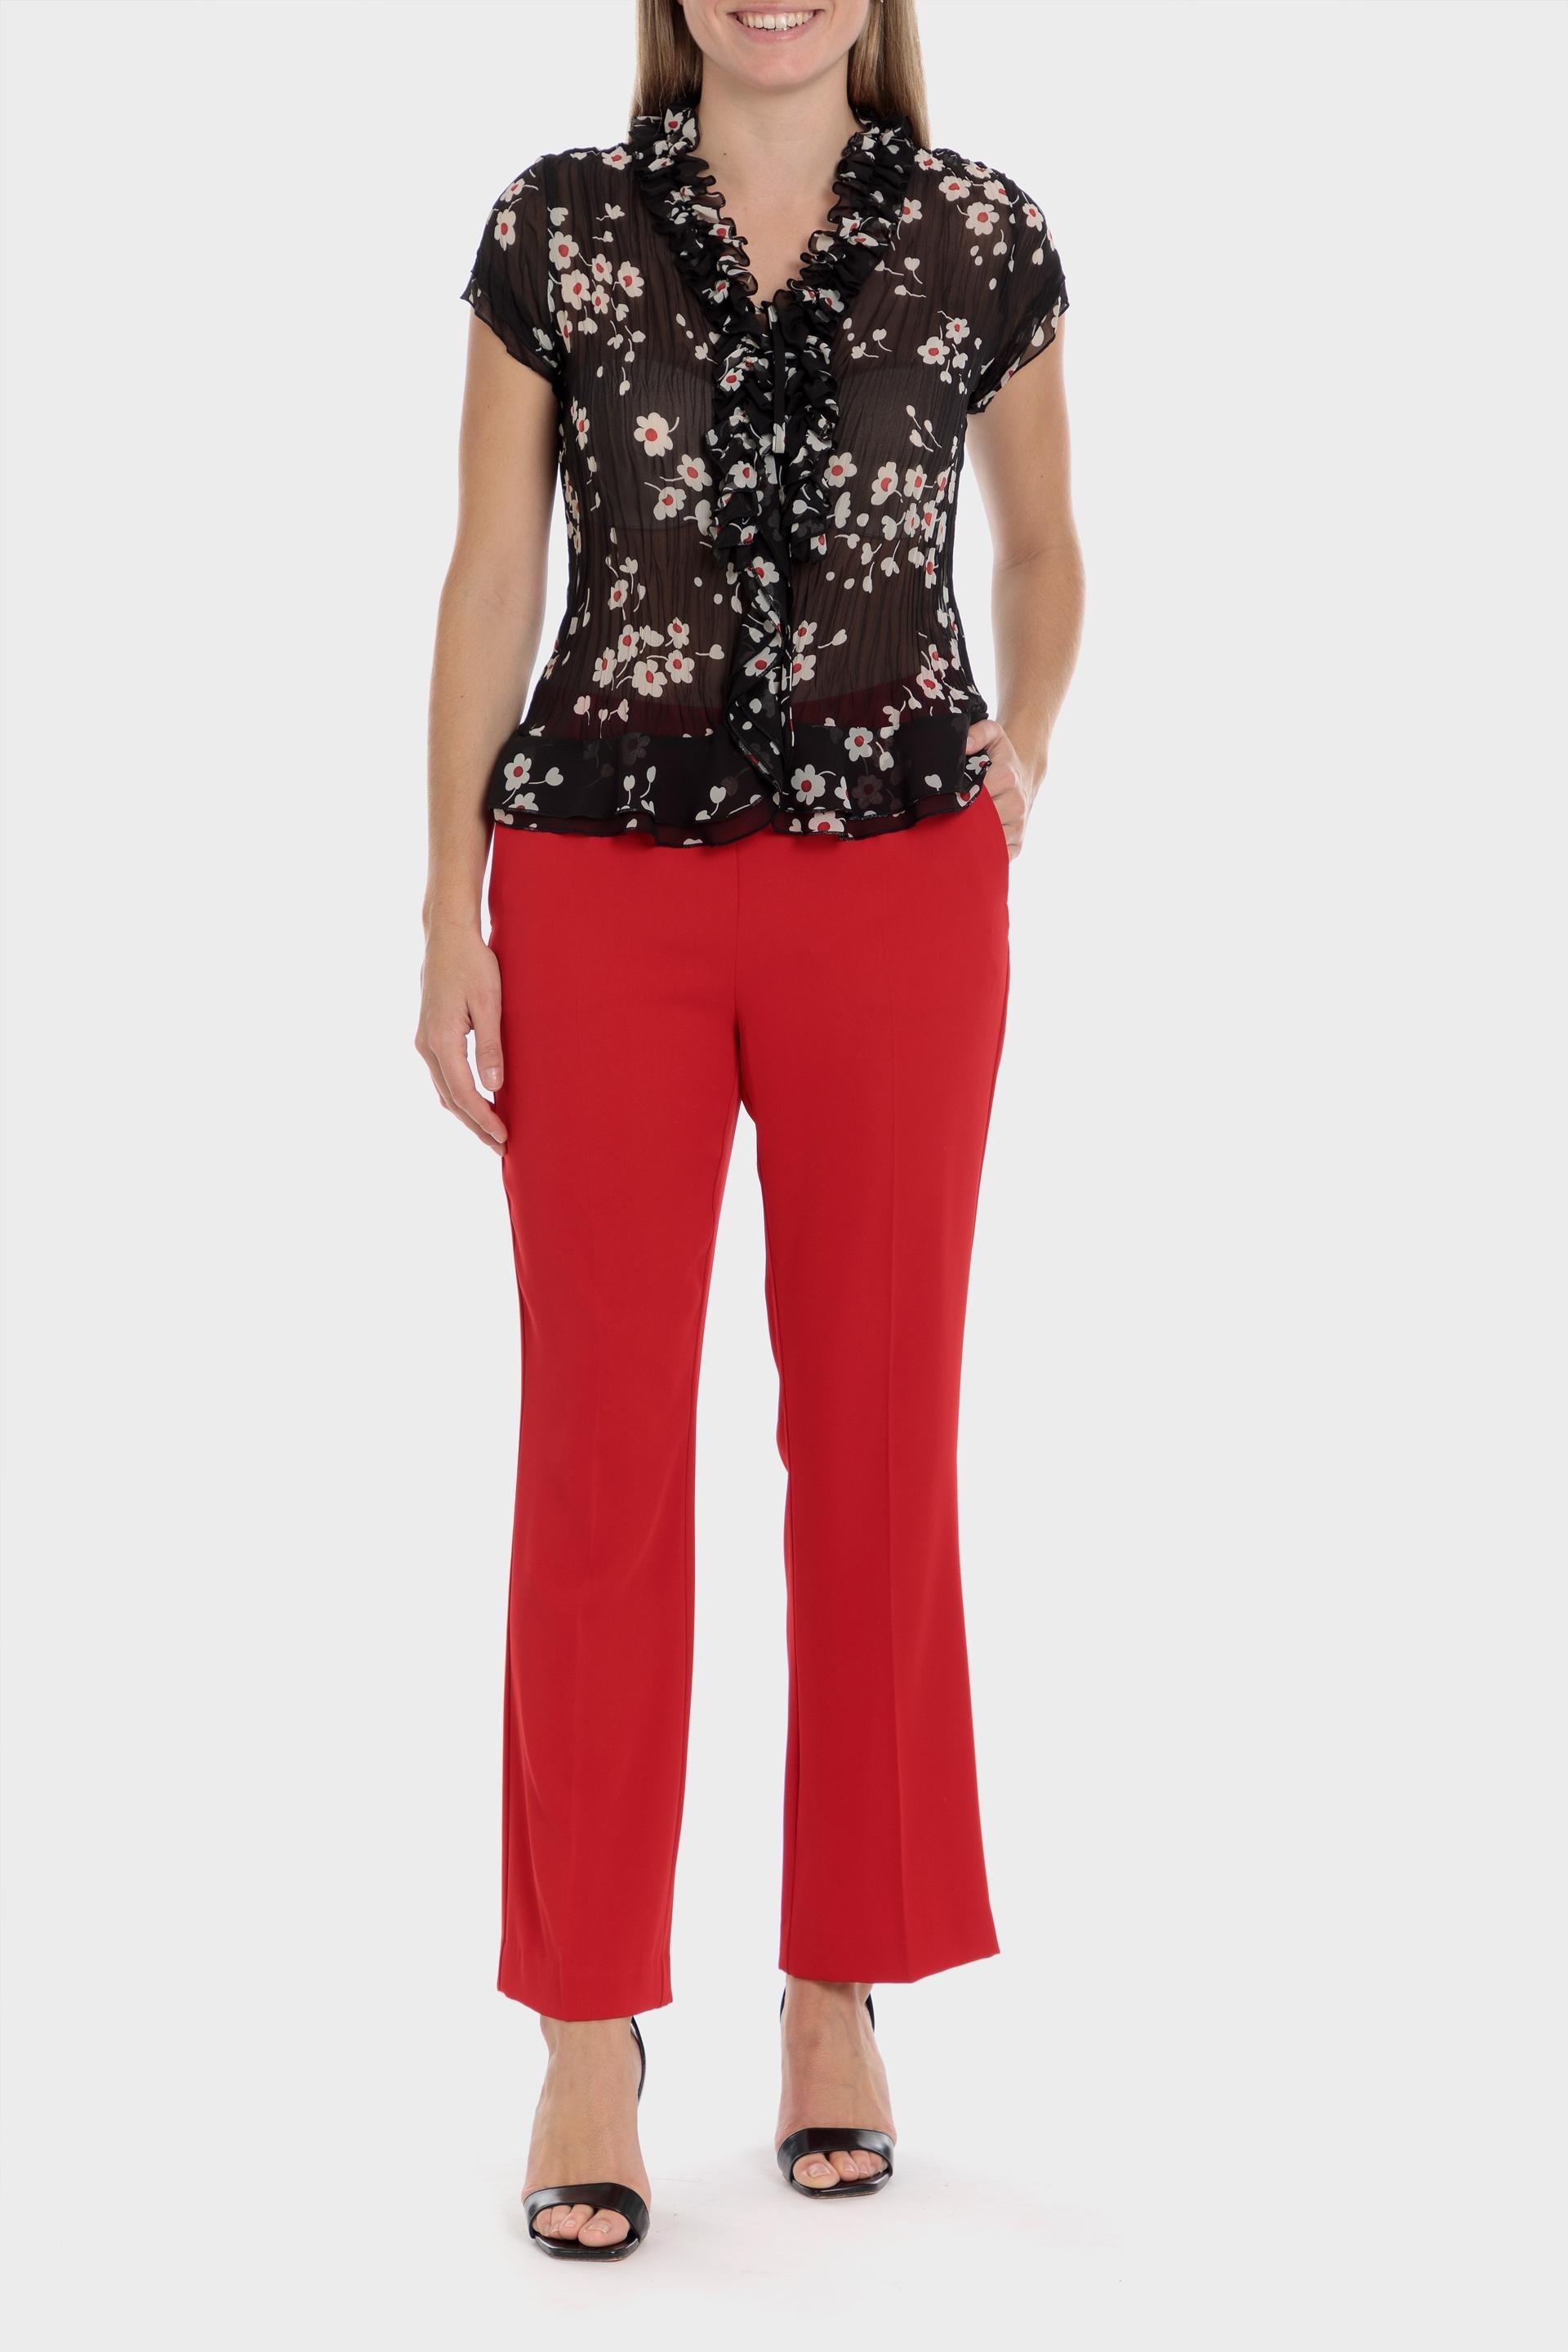 Punt Roma - Red Long Trousers